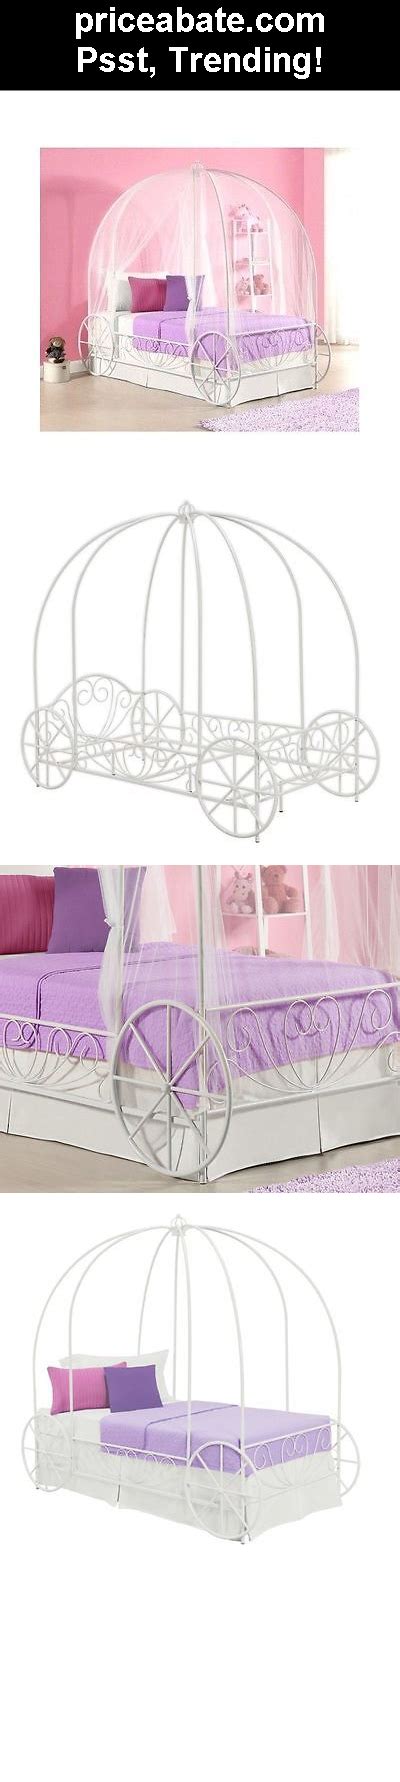 Especially for our children, we need this awesome ideas. Princess Carriage Bed Frame Girls Canopy Bedroom ...